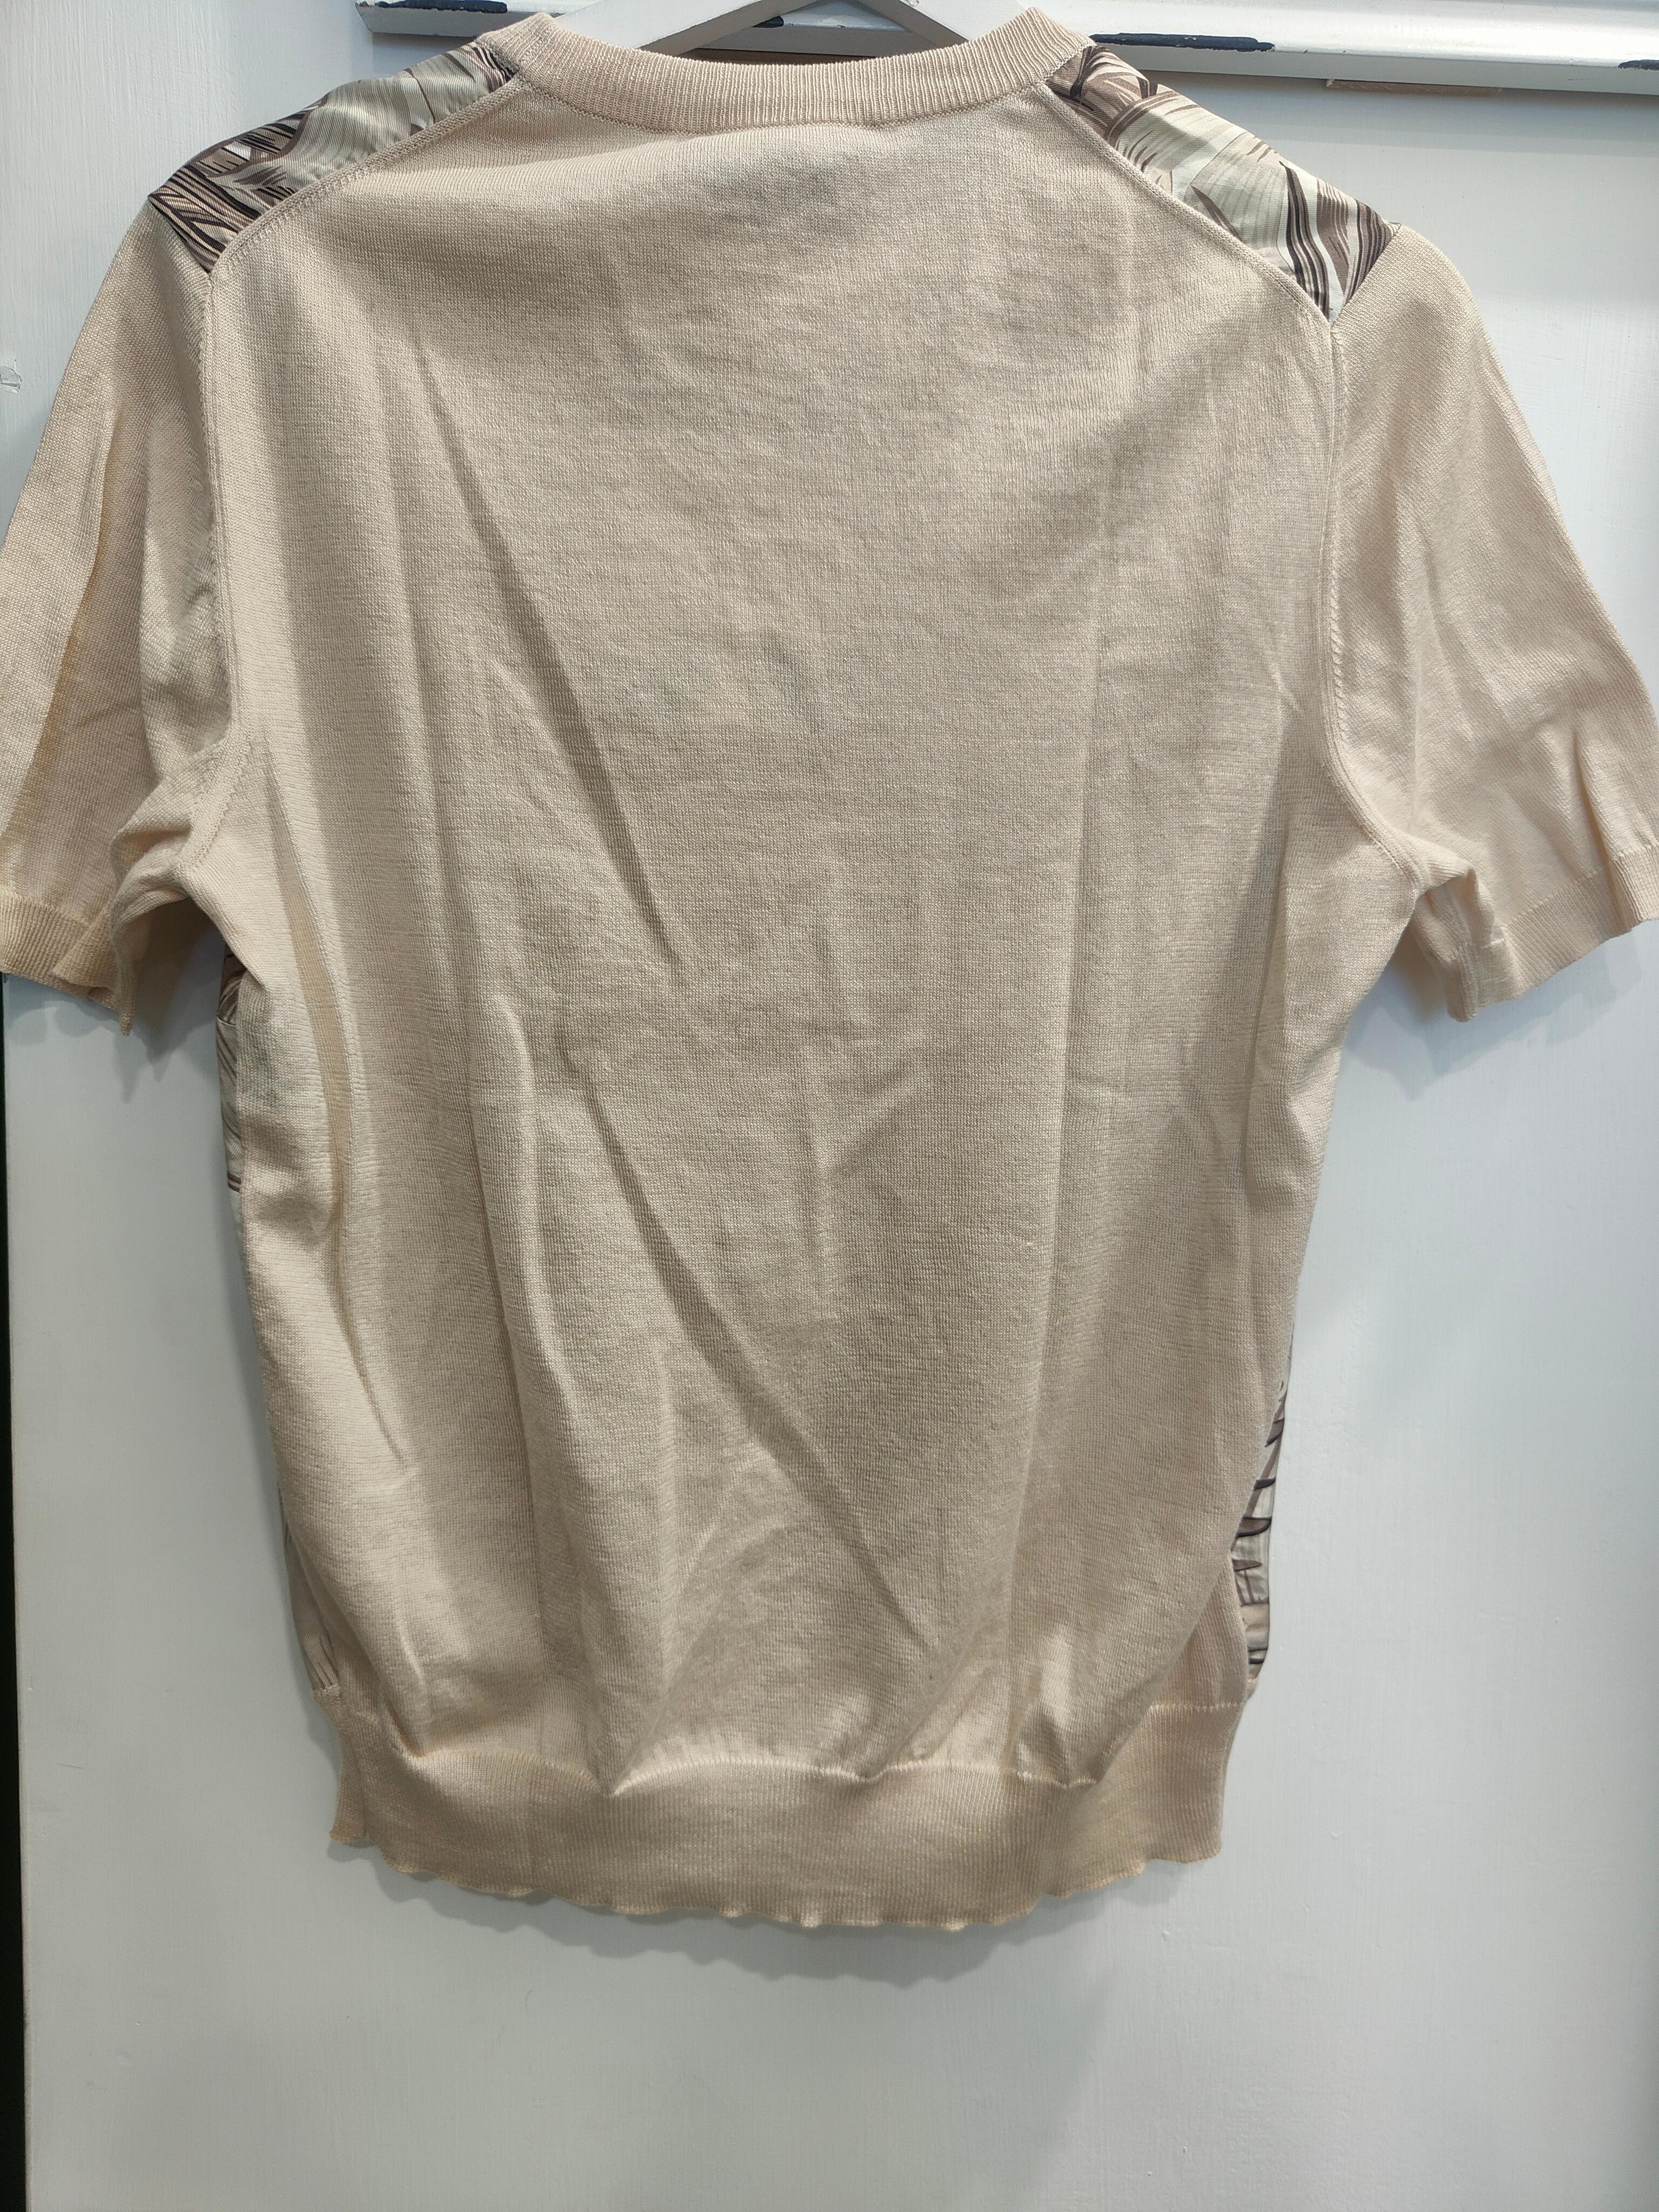 Salvatore Ferragamo silk blouse totally made in Italy in size L
Short sleeves